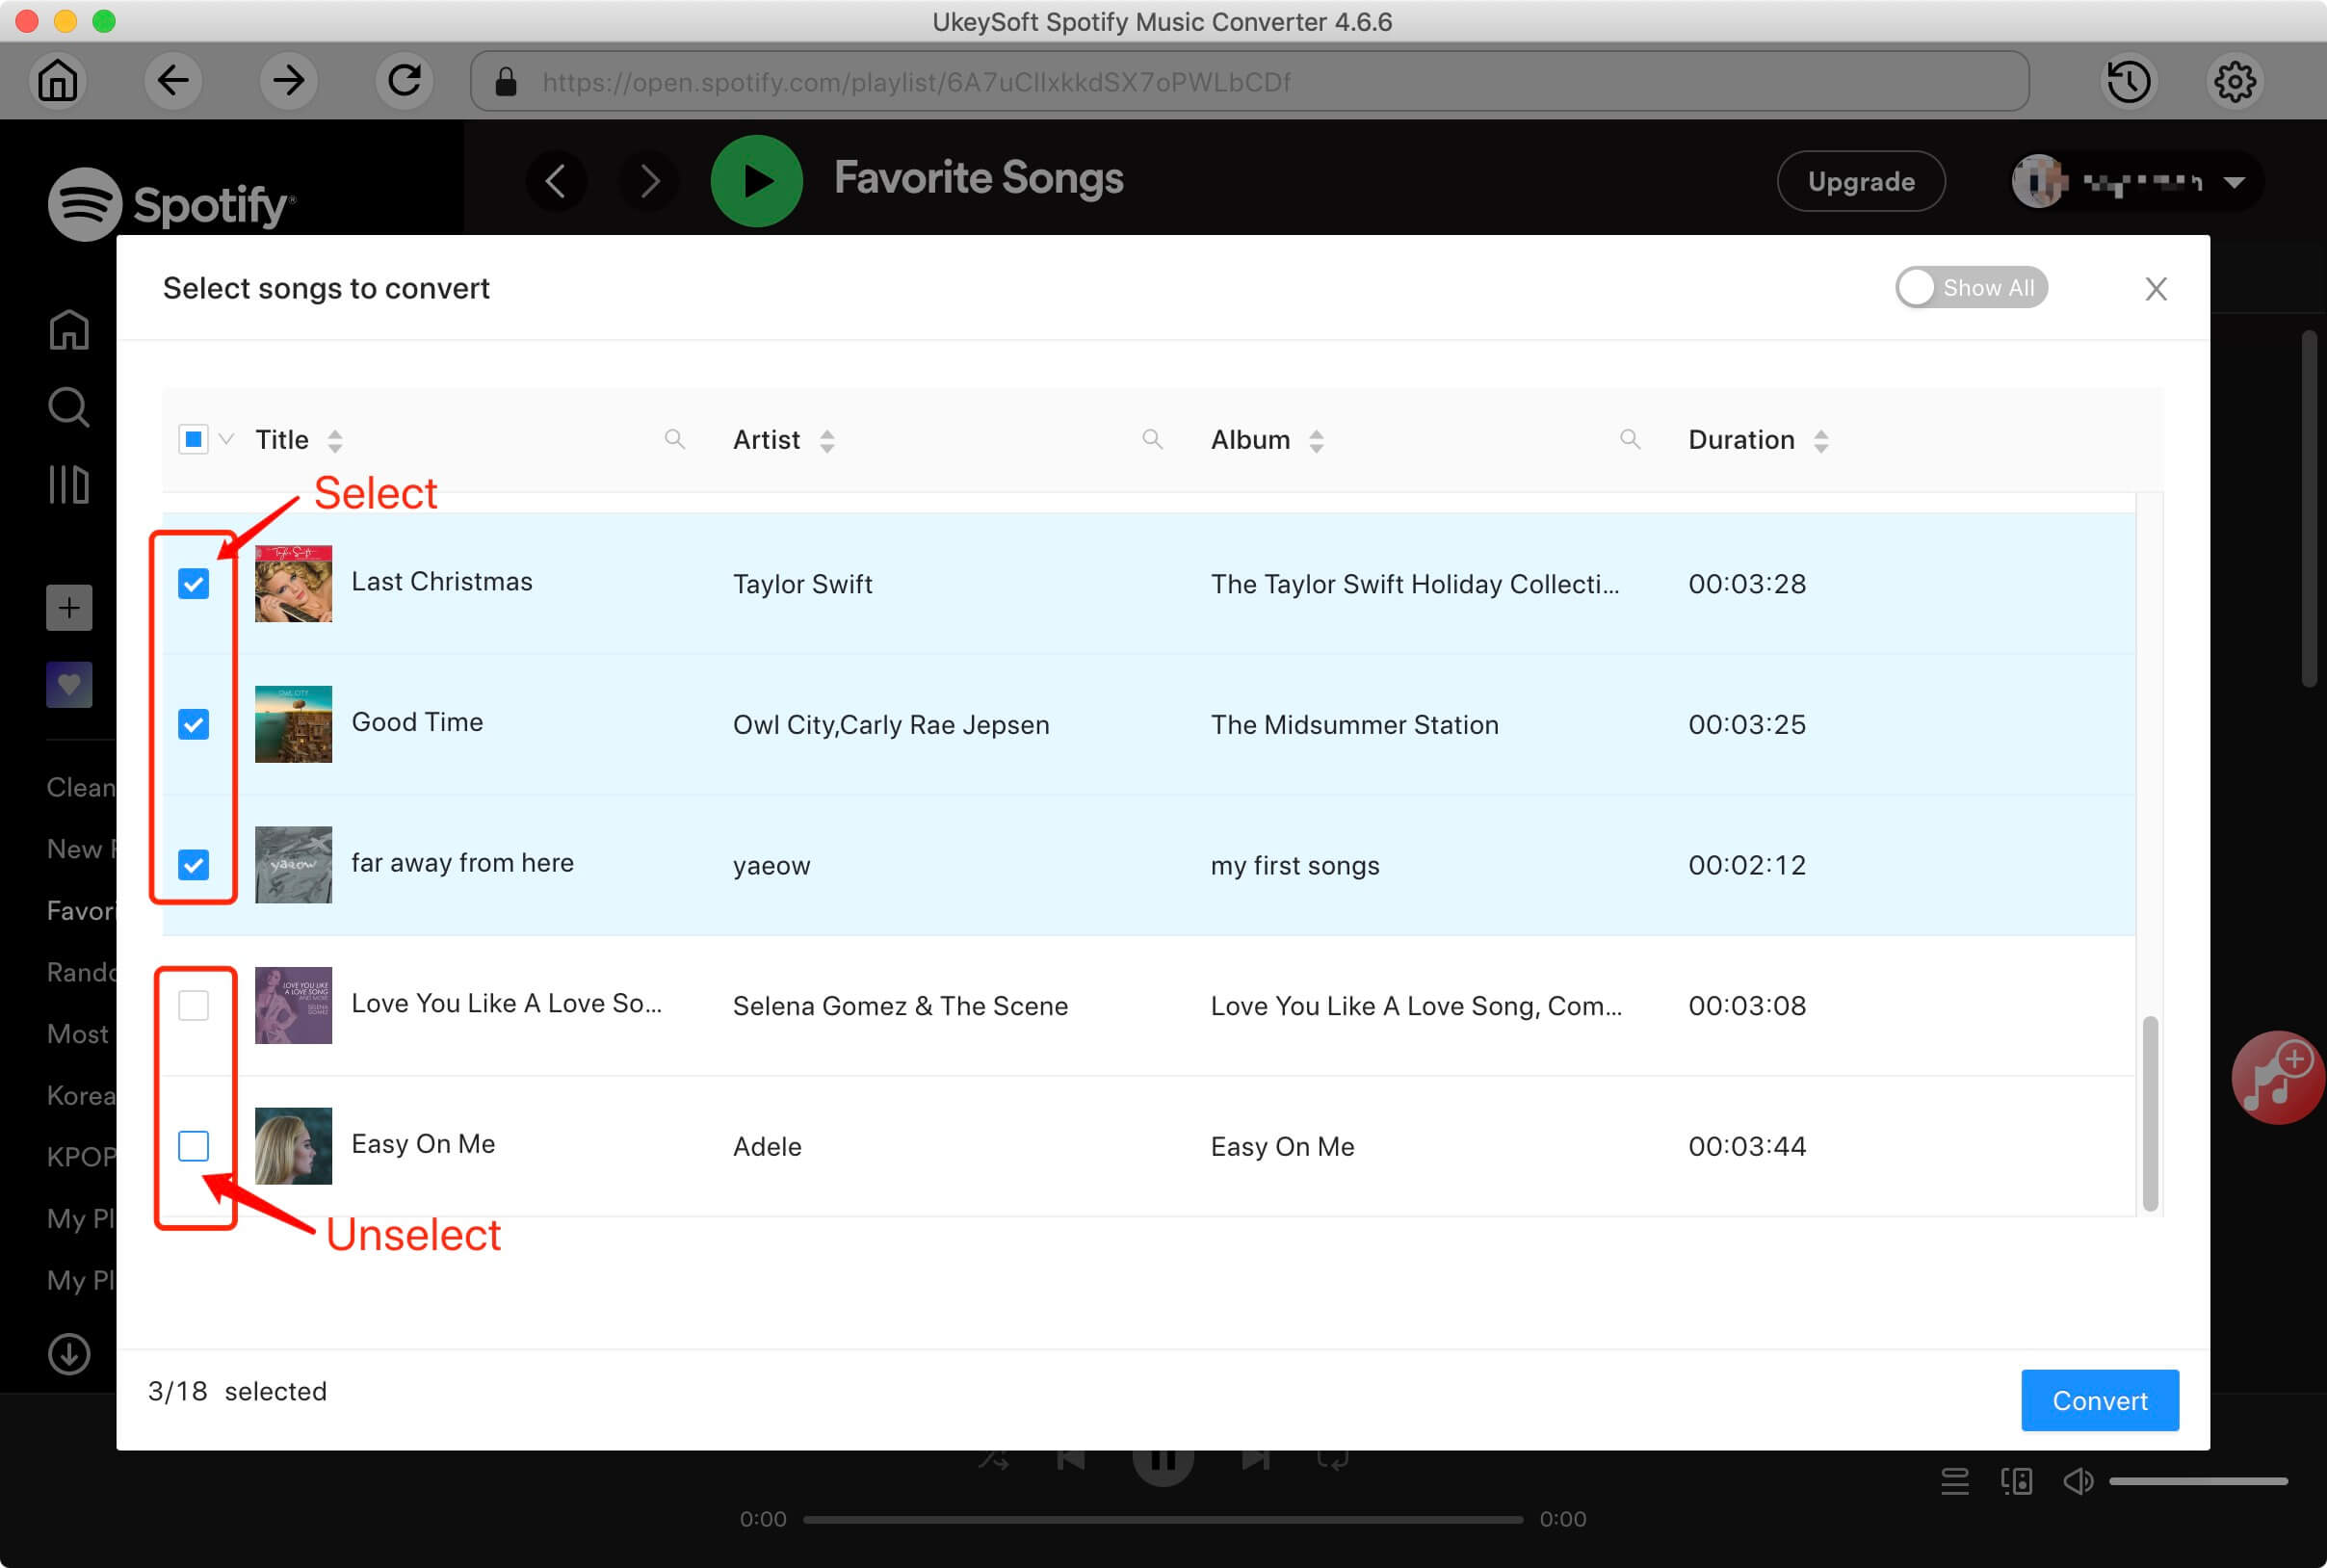 free Spotify 1.2.14.1149 for iphone download